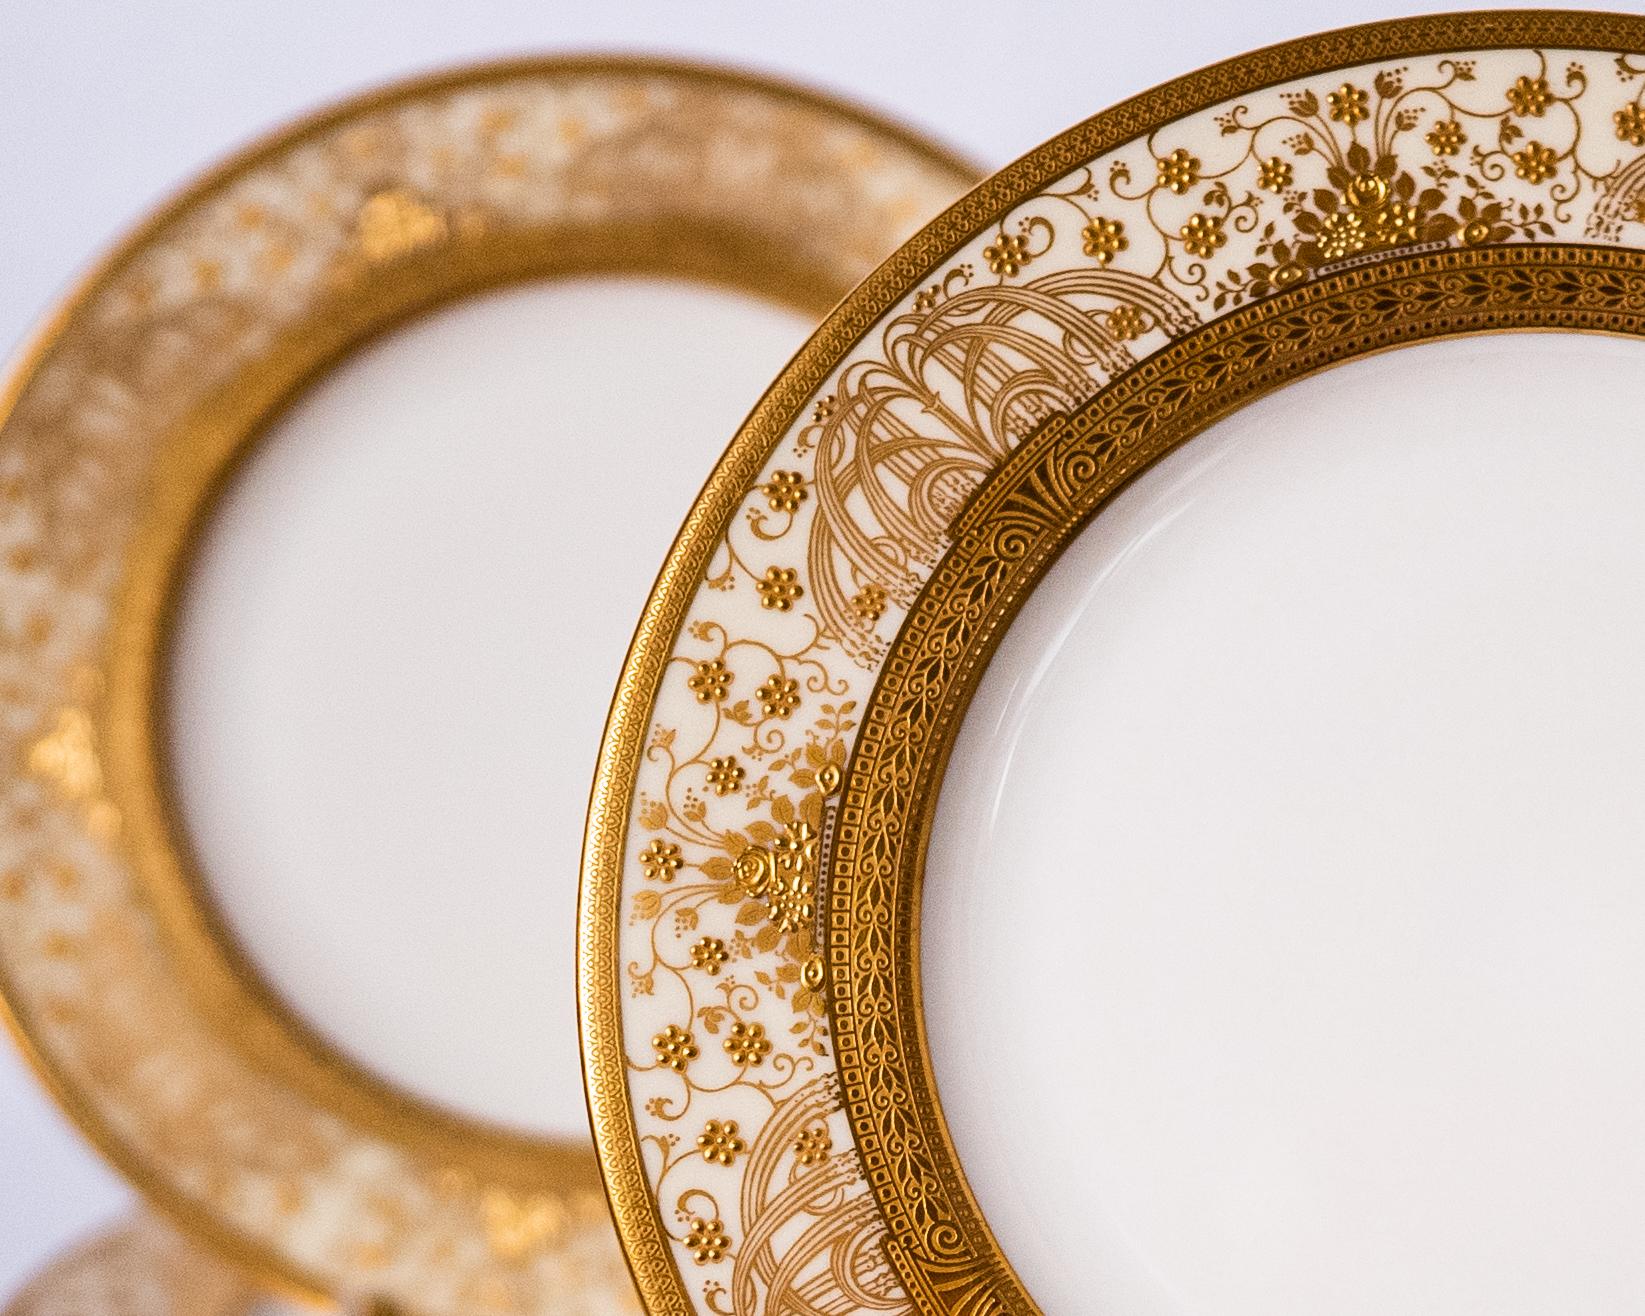 A great set of gilded dessert, first course or salad plate (nice clear centers) with an Art Nouveau raised gilt foliate design. Custom ordered through the fine Gilded Age Retailer, Marshall Fields Chicago and custom made by one of the US re known